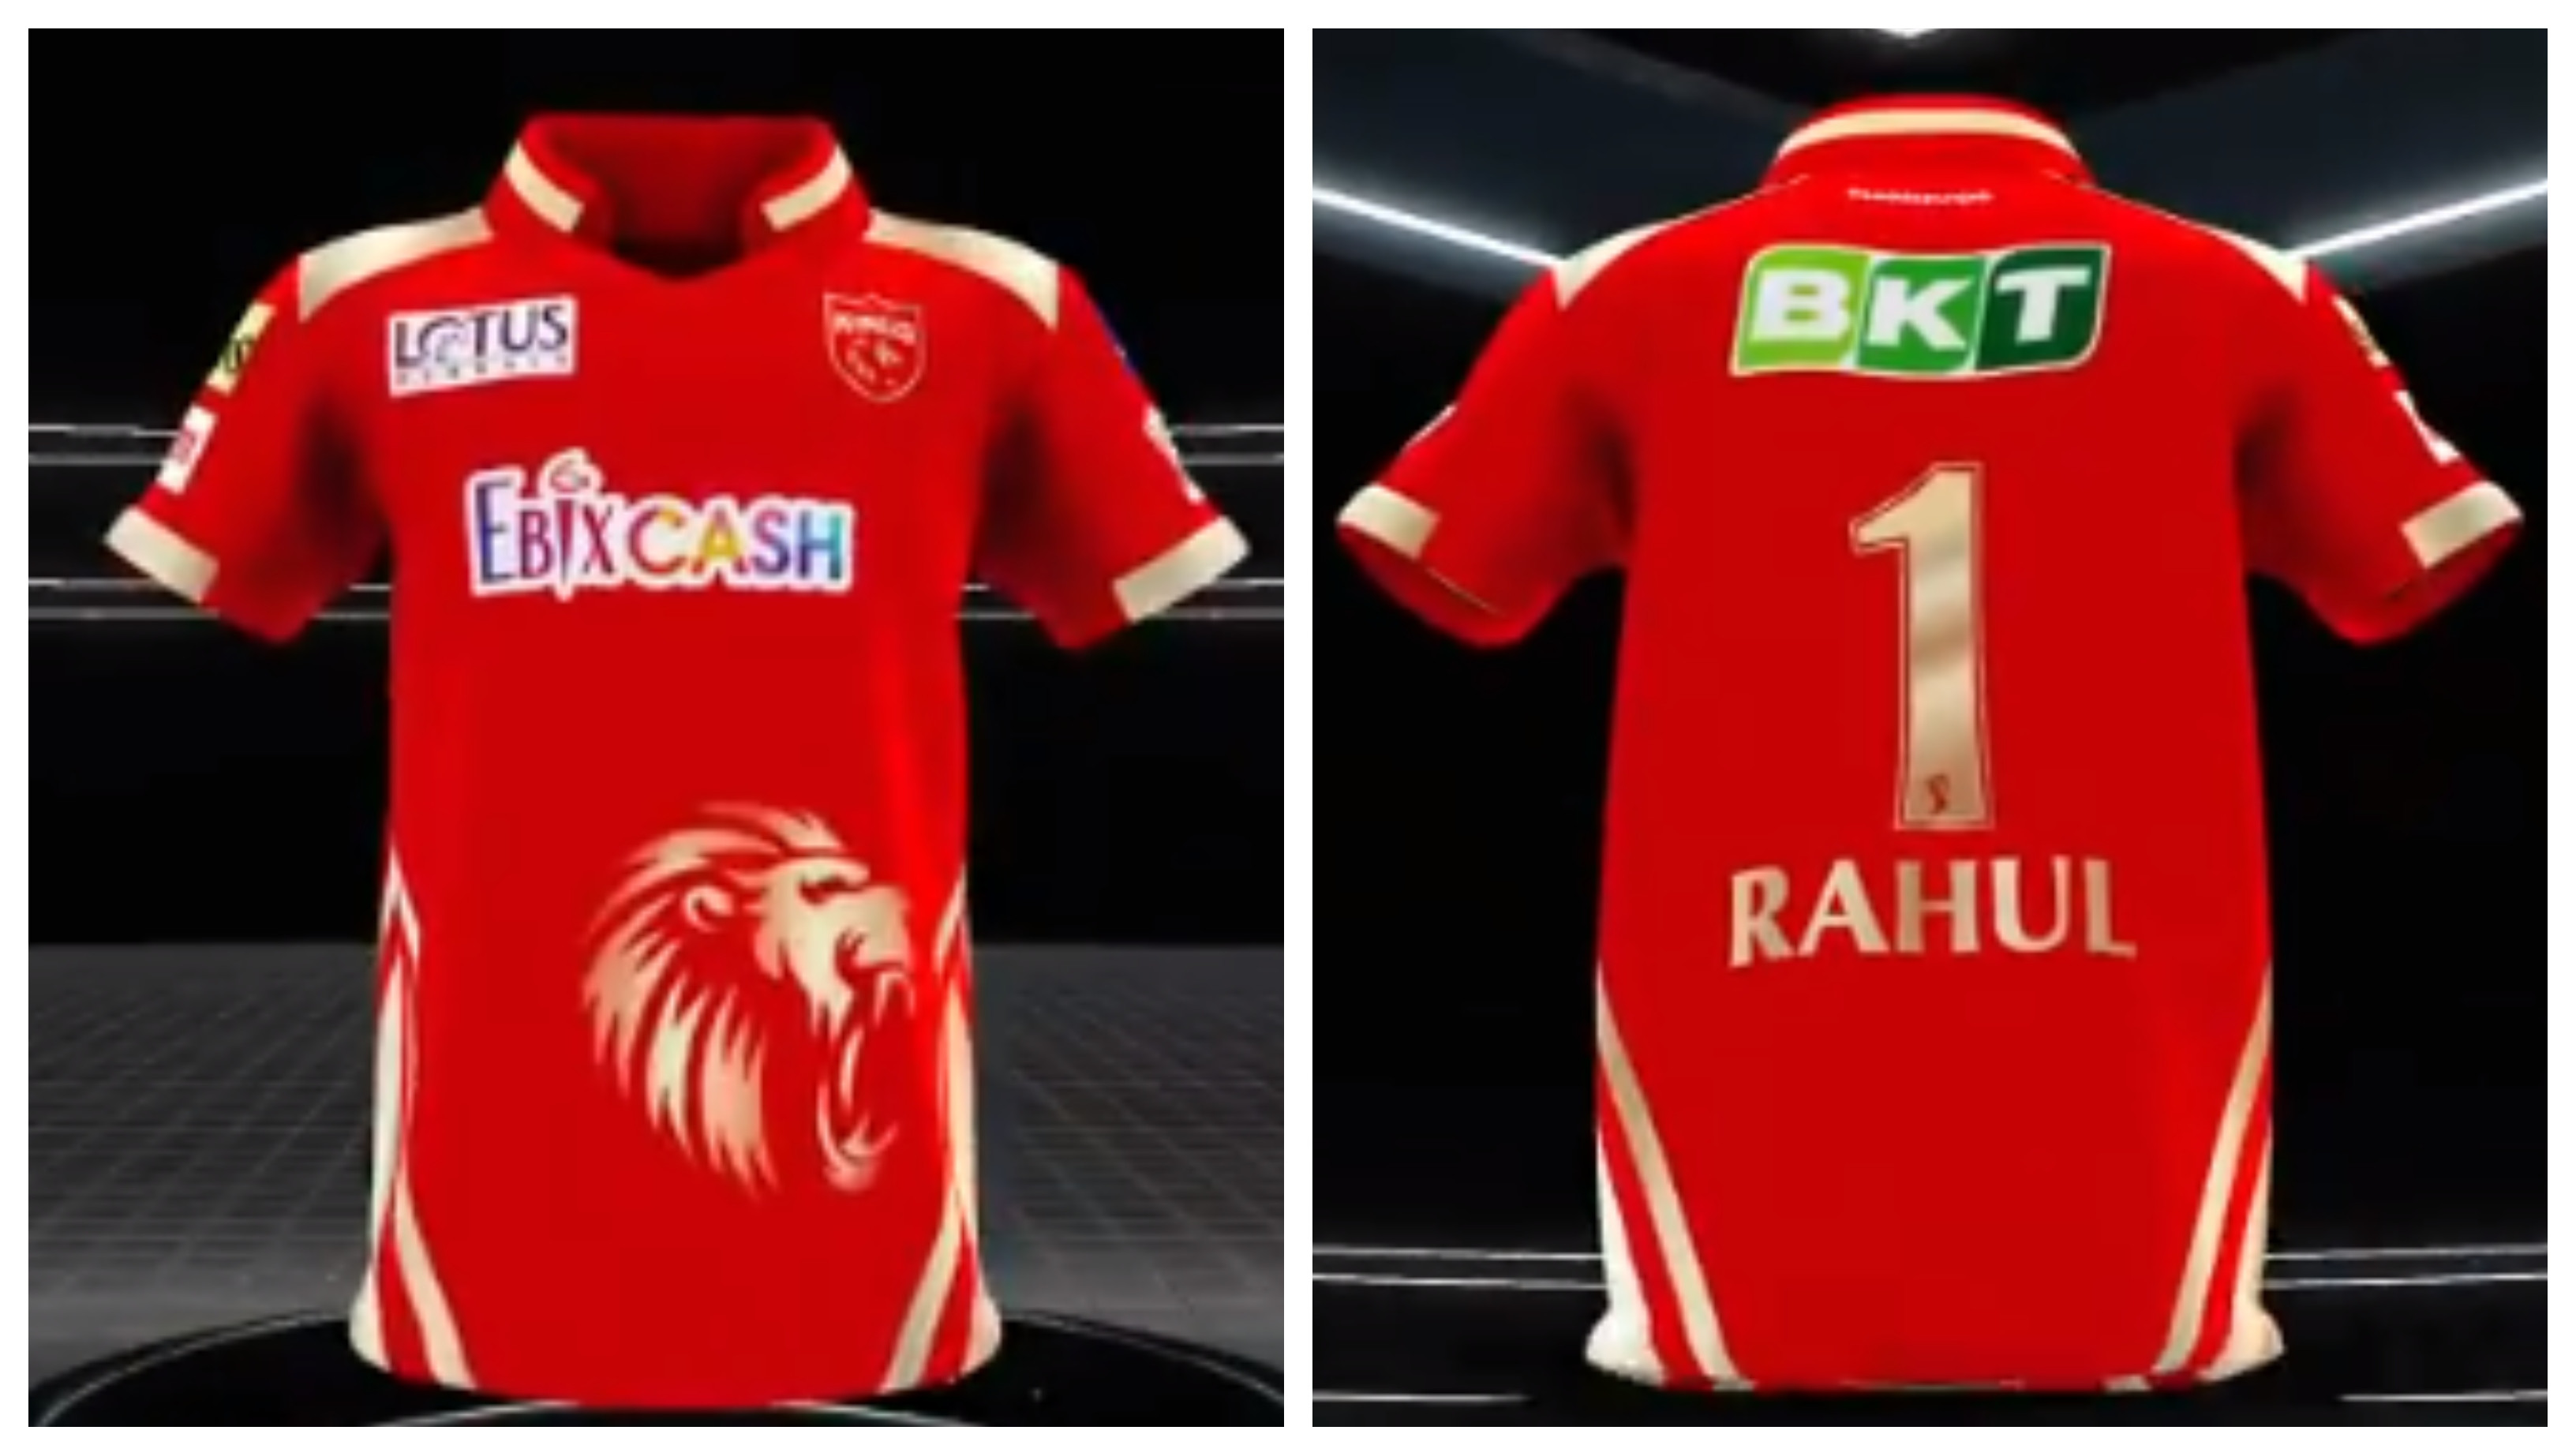 IPL 2021: Punjab Kings unveil their new jersey ahead of the upcoming IPL